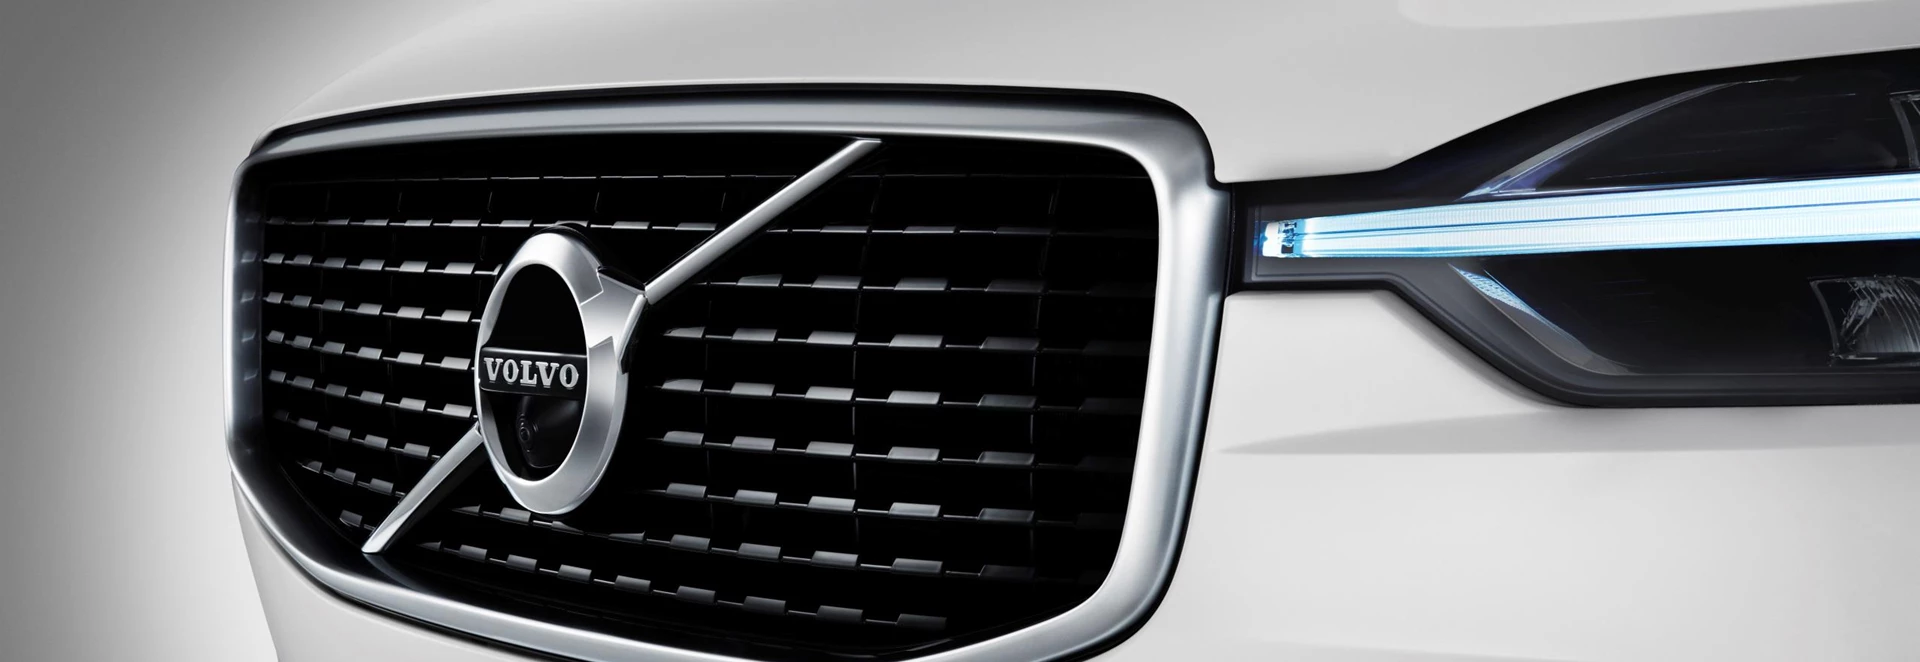 Every Volvo to have electric power by 2019 